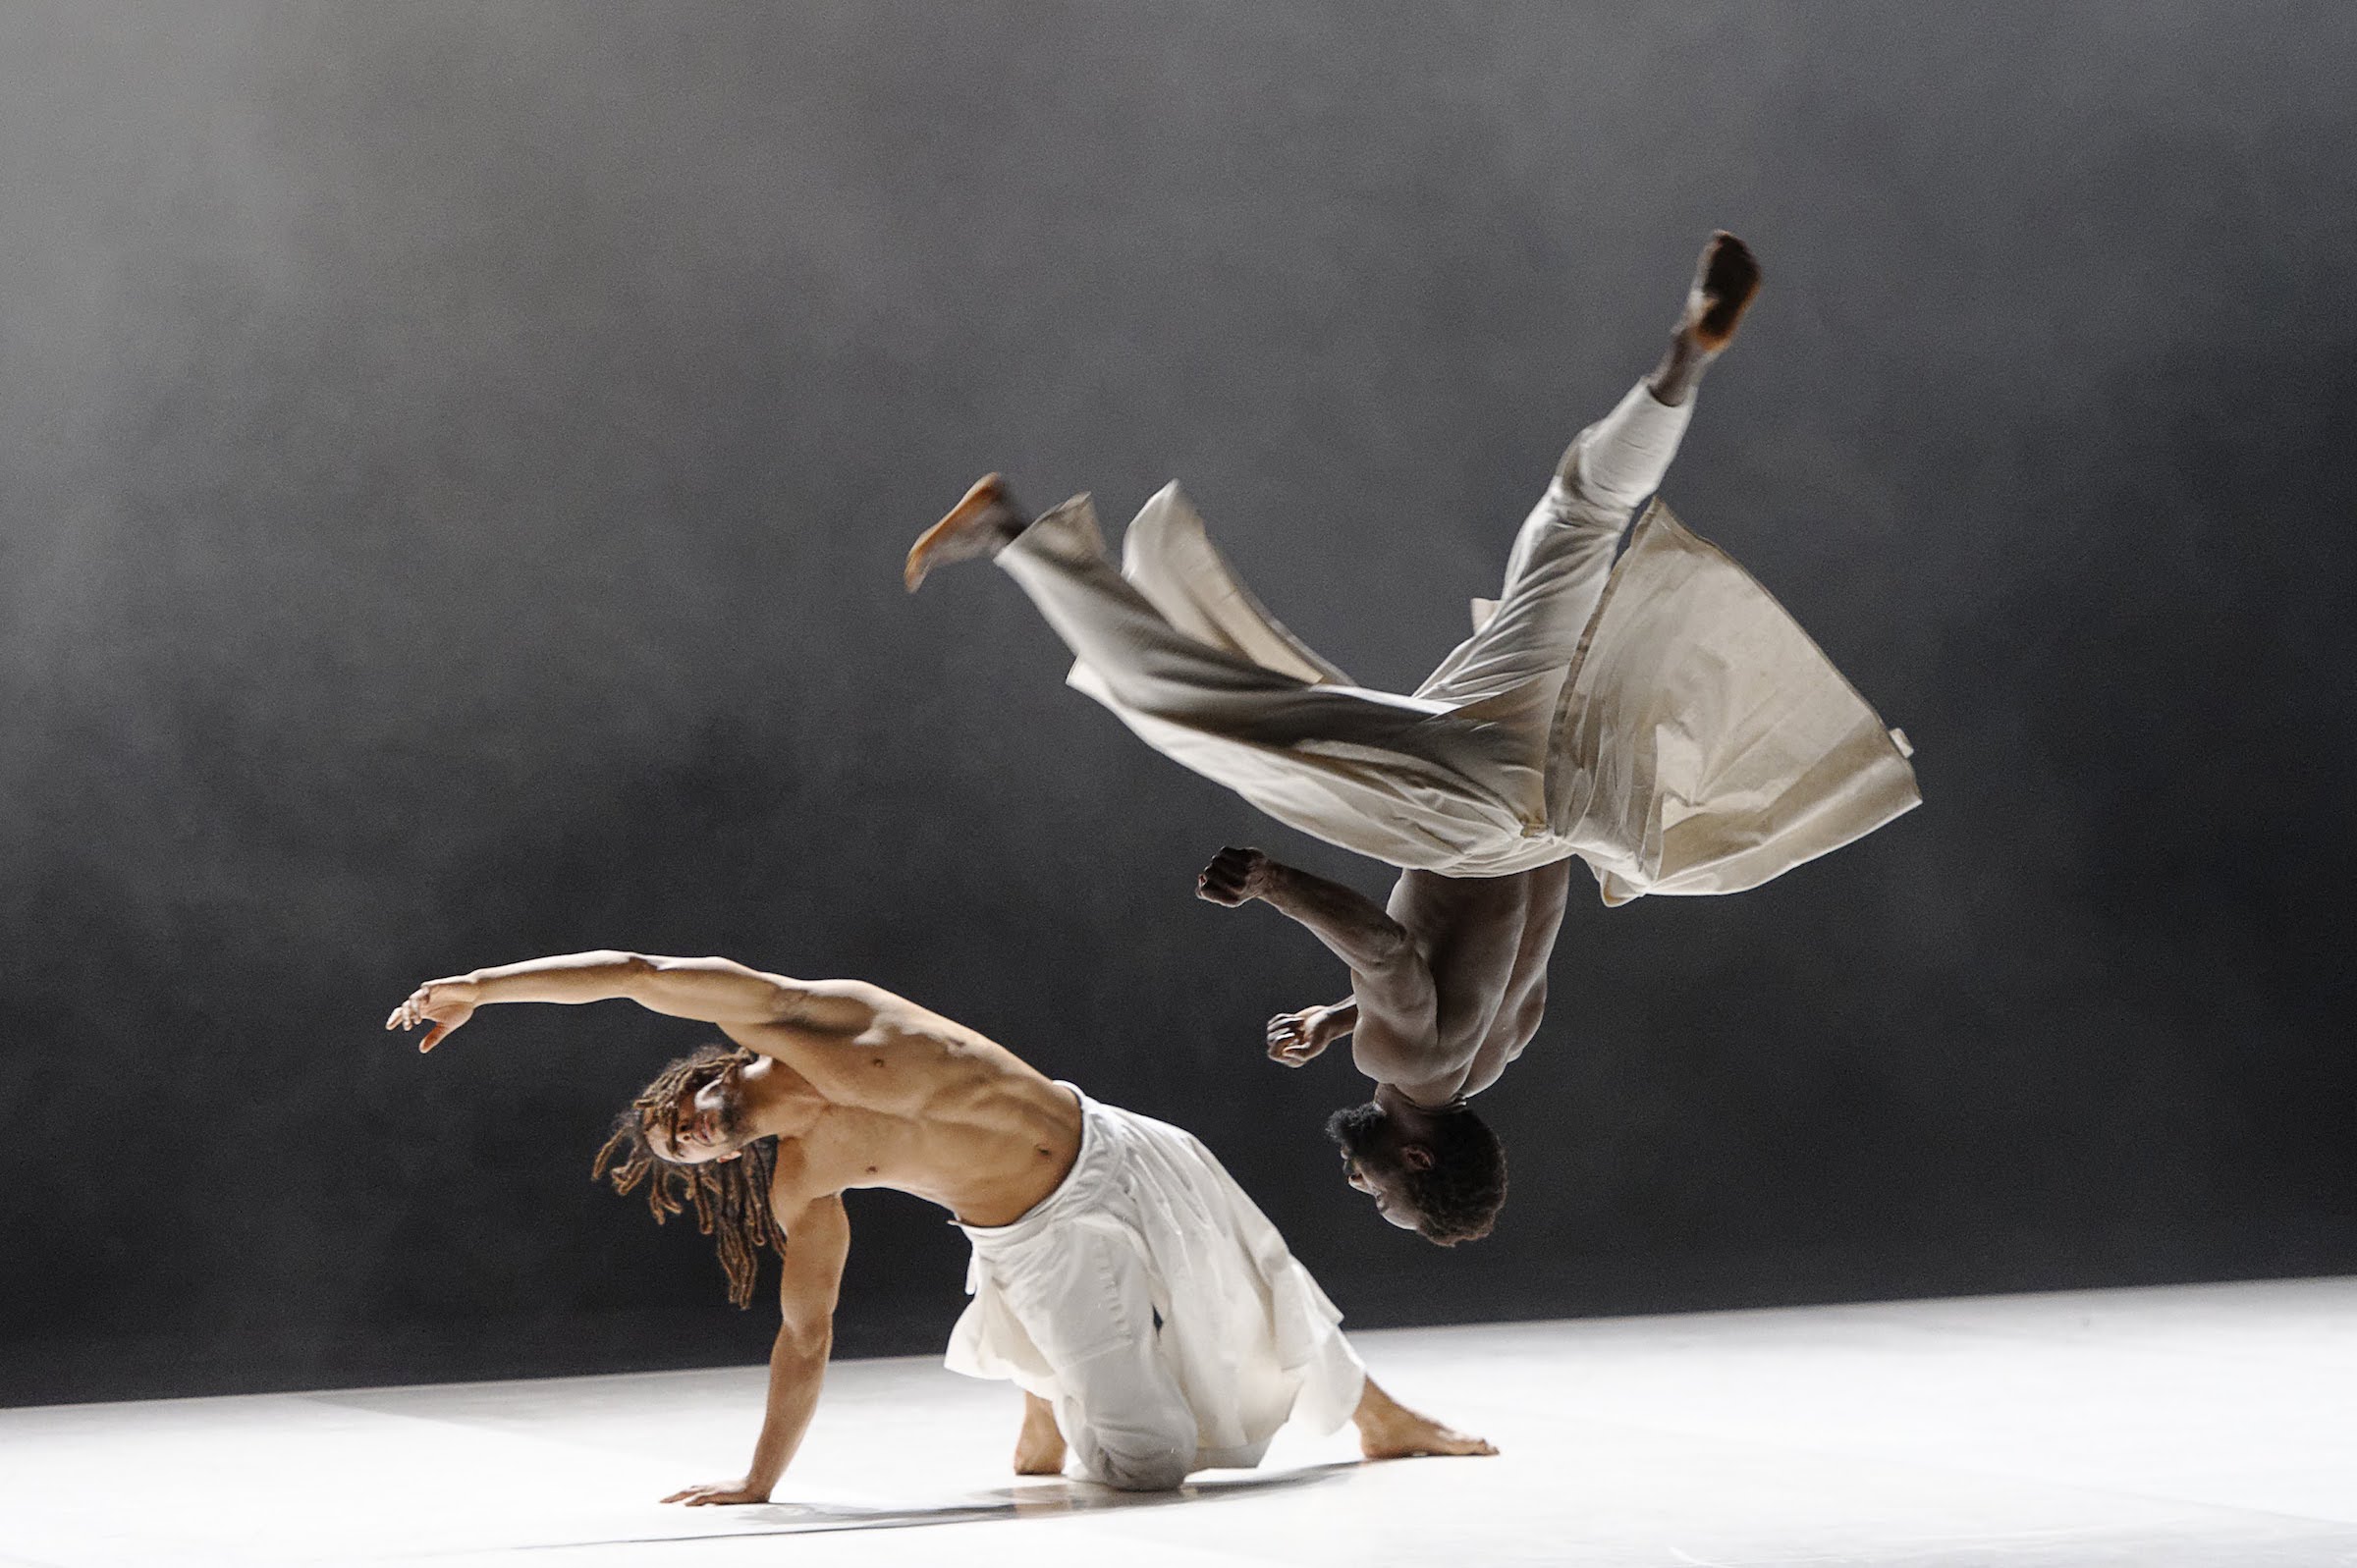 Two dancers from Company Herve Koubi - one caught flipping in midair, one with on a knee with one arm outstretched. Photo by Nathalie Sternalski.